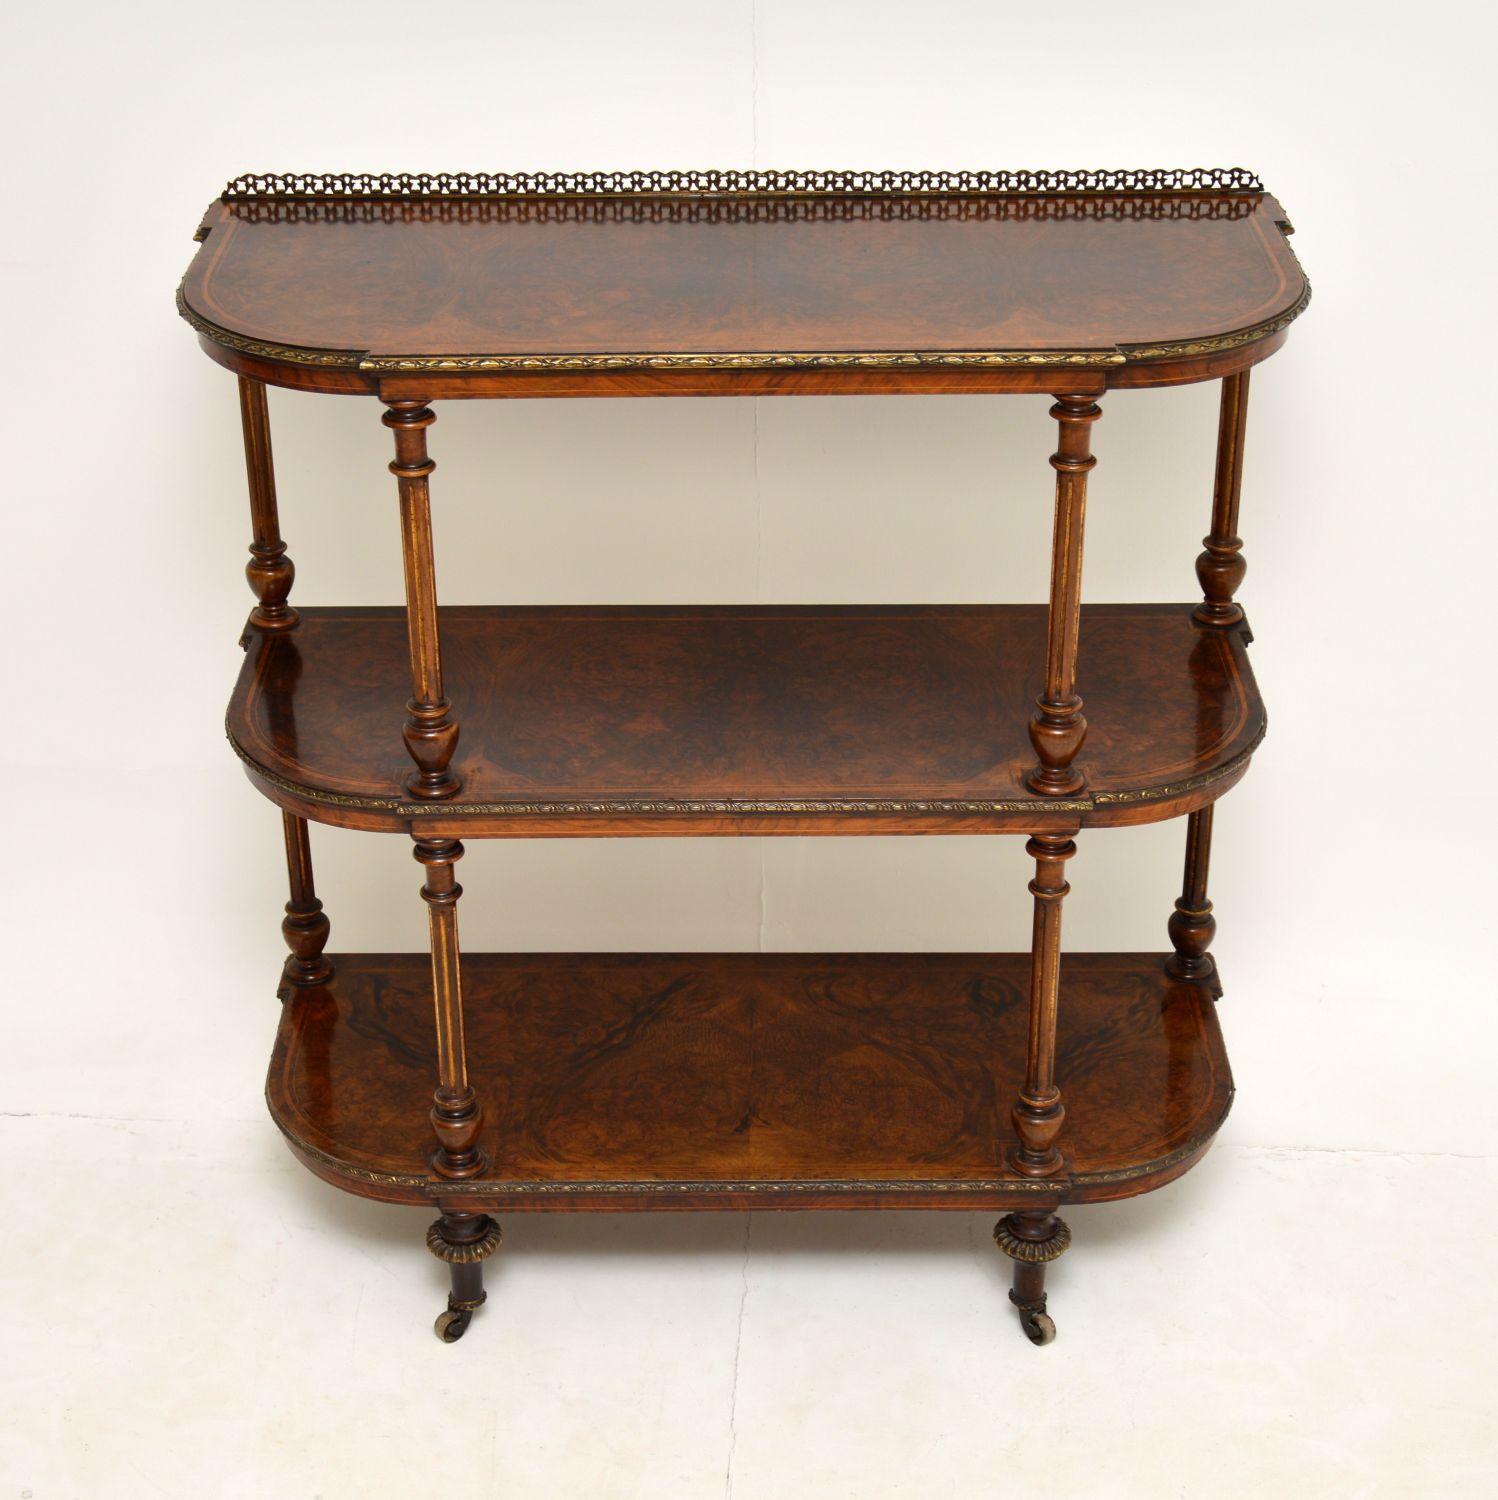 A stunning antique Victorian three tier étagère or buffet on casters. This was made in England, it dates from around the 1860-1880 period.

The quality is superb, this has wonderful burr walnut veneers on each tier, bordered with satin wood inlay.